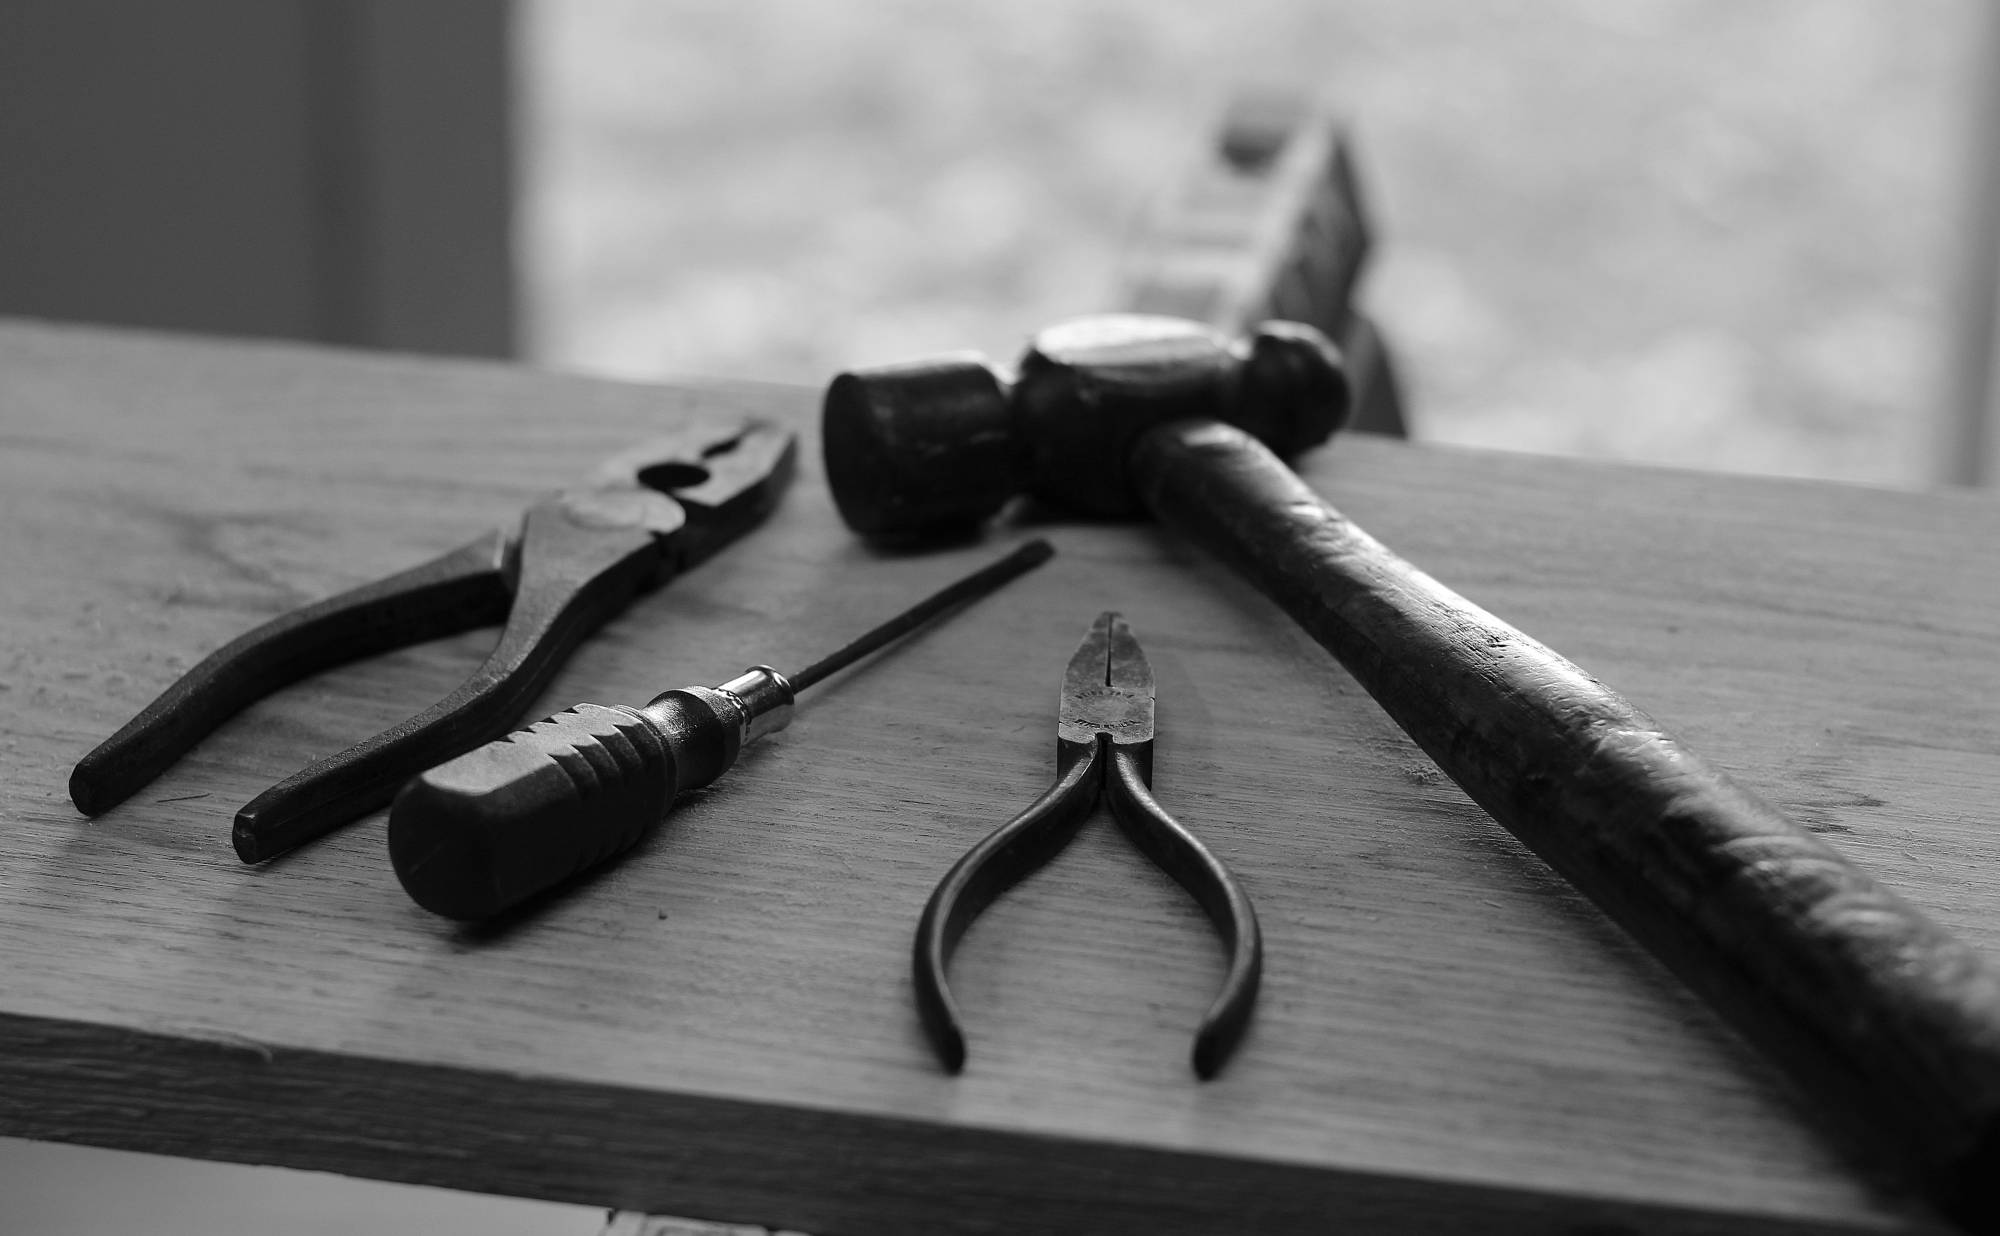 Tools on a table